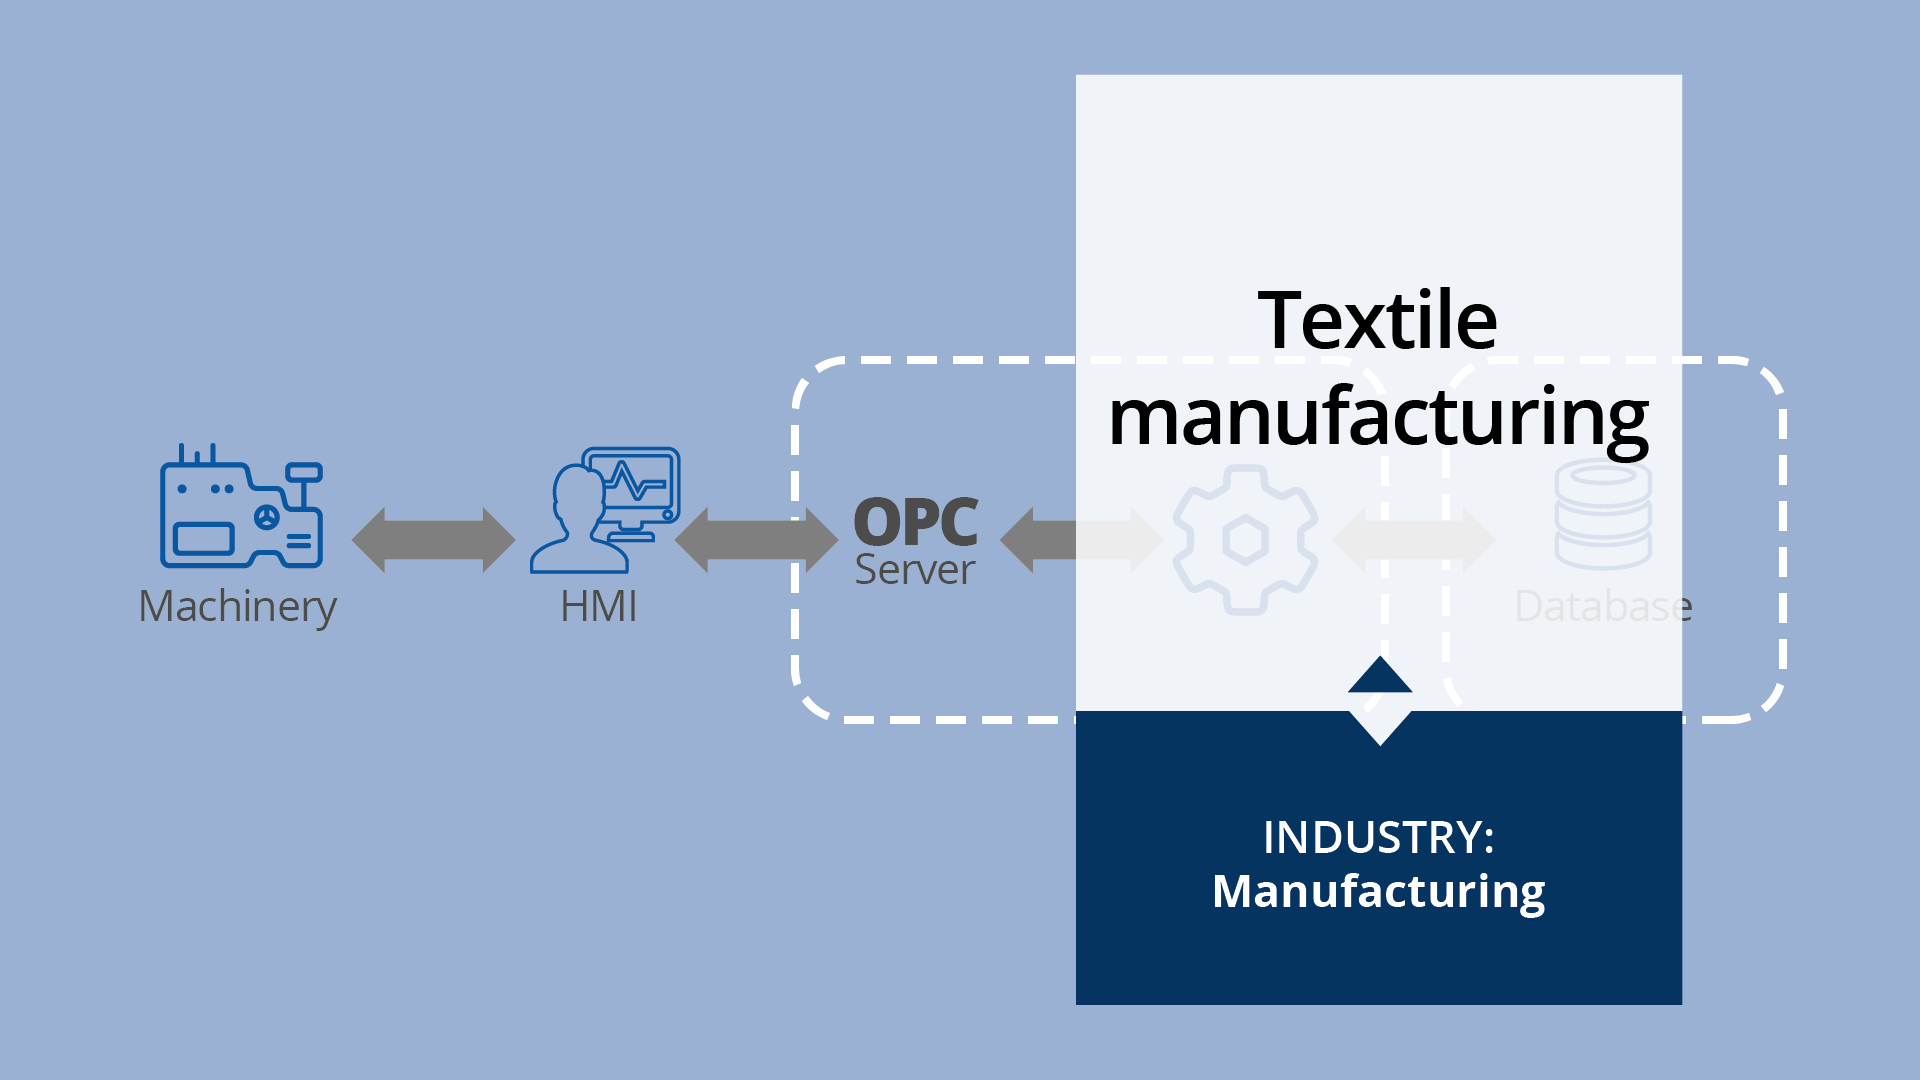 Textile manufacturing use case page